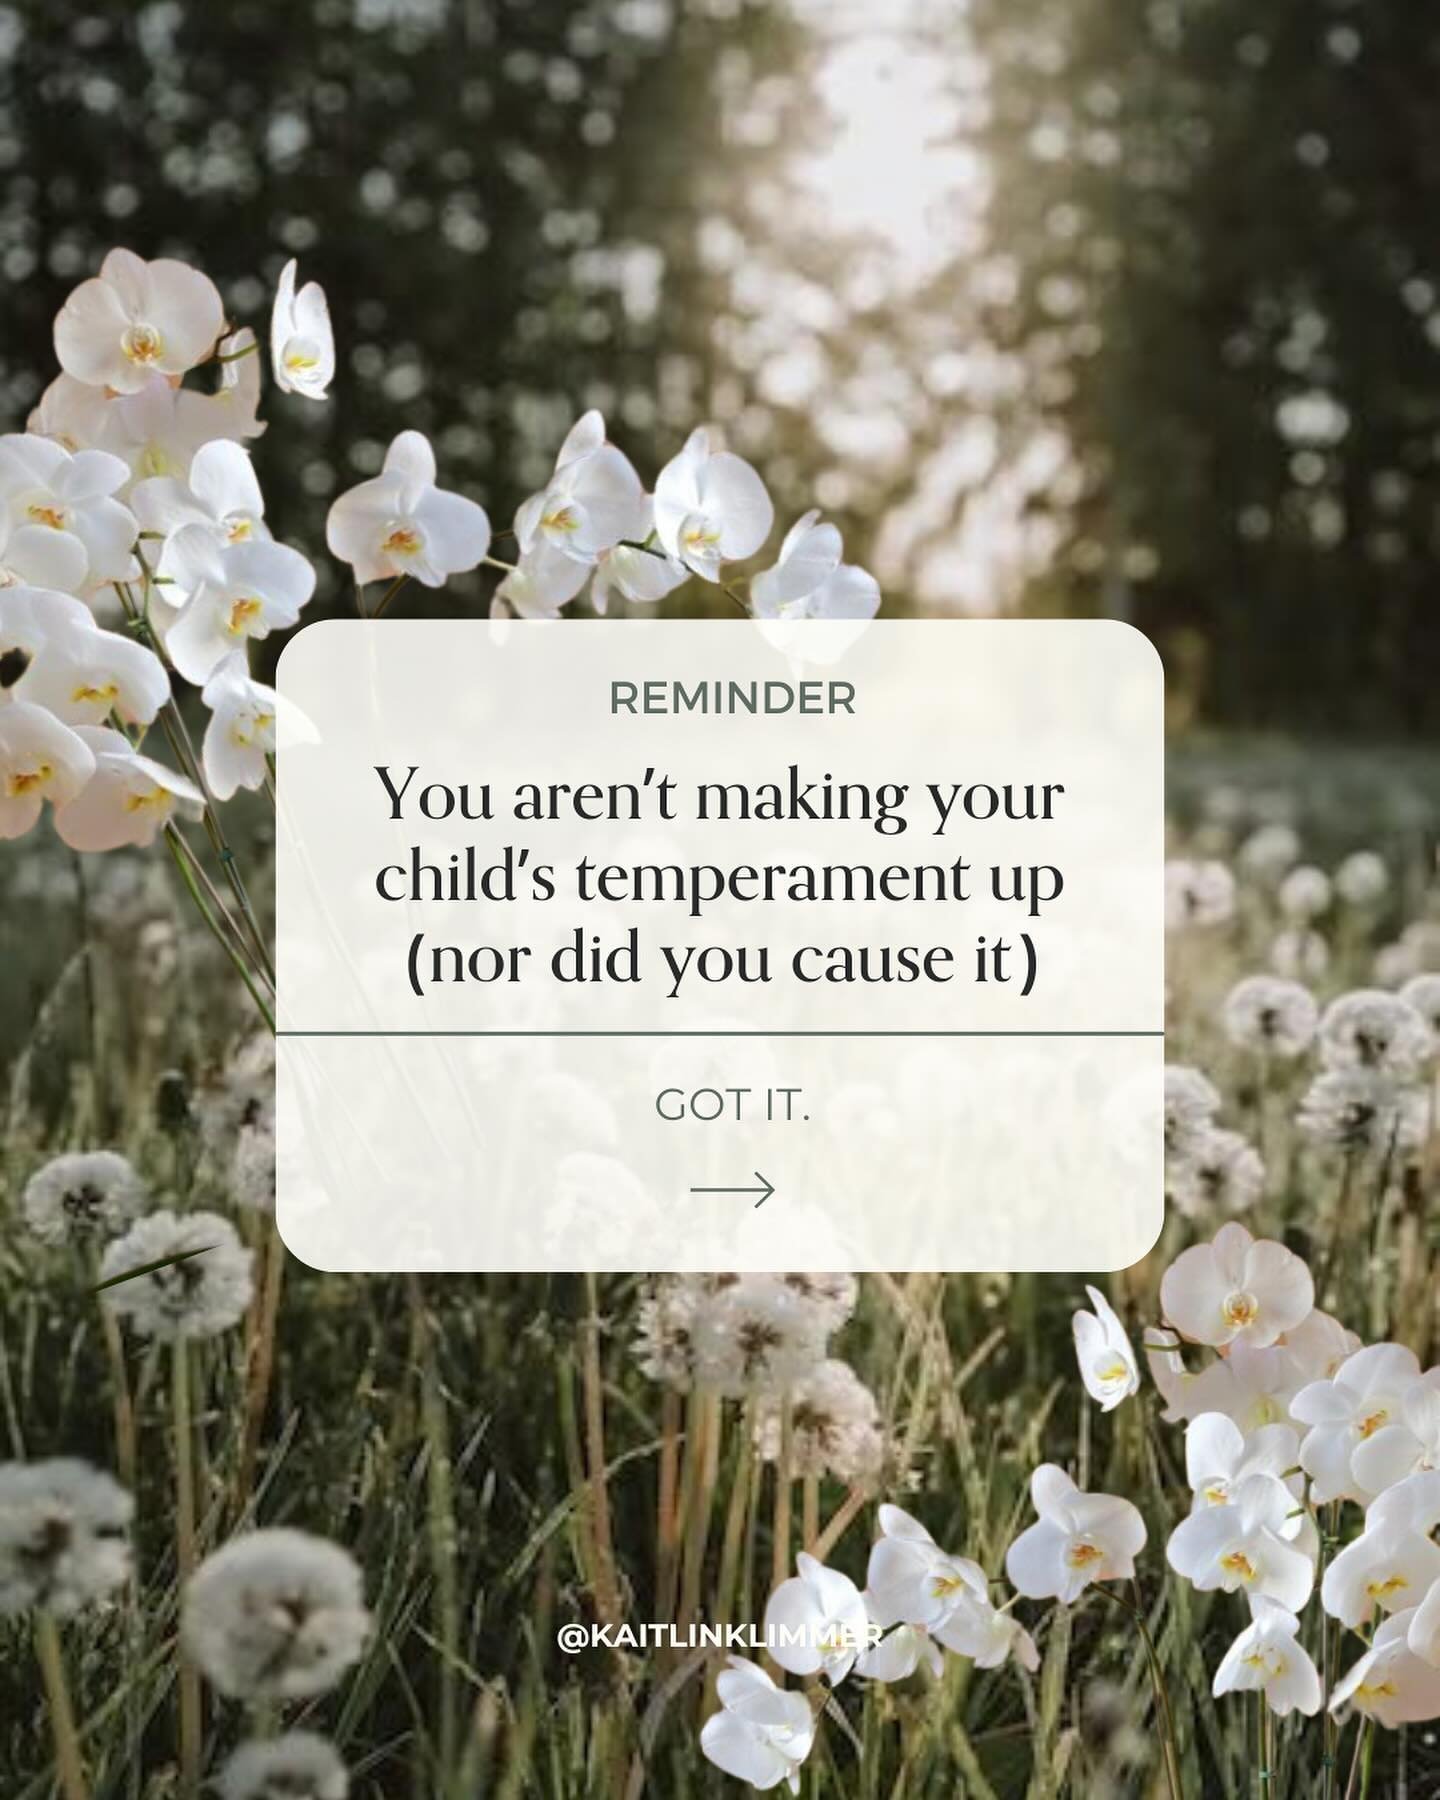 What&rsquo;s this mean for you?

Ignore anyone who says you are imagining - or worse, you caused - your child&rsquo;s sensitivity. You absolutely did not.

Also ignore anyone telling you that you need to double down on your warm, nurturing approach t